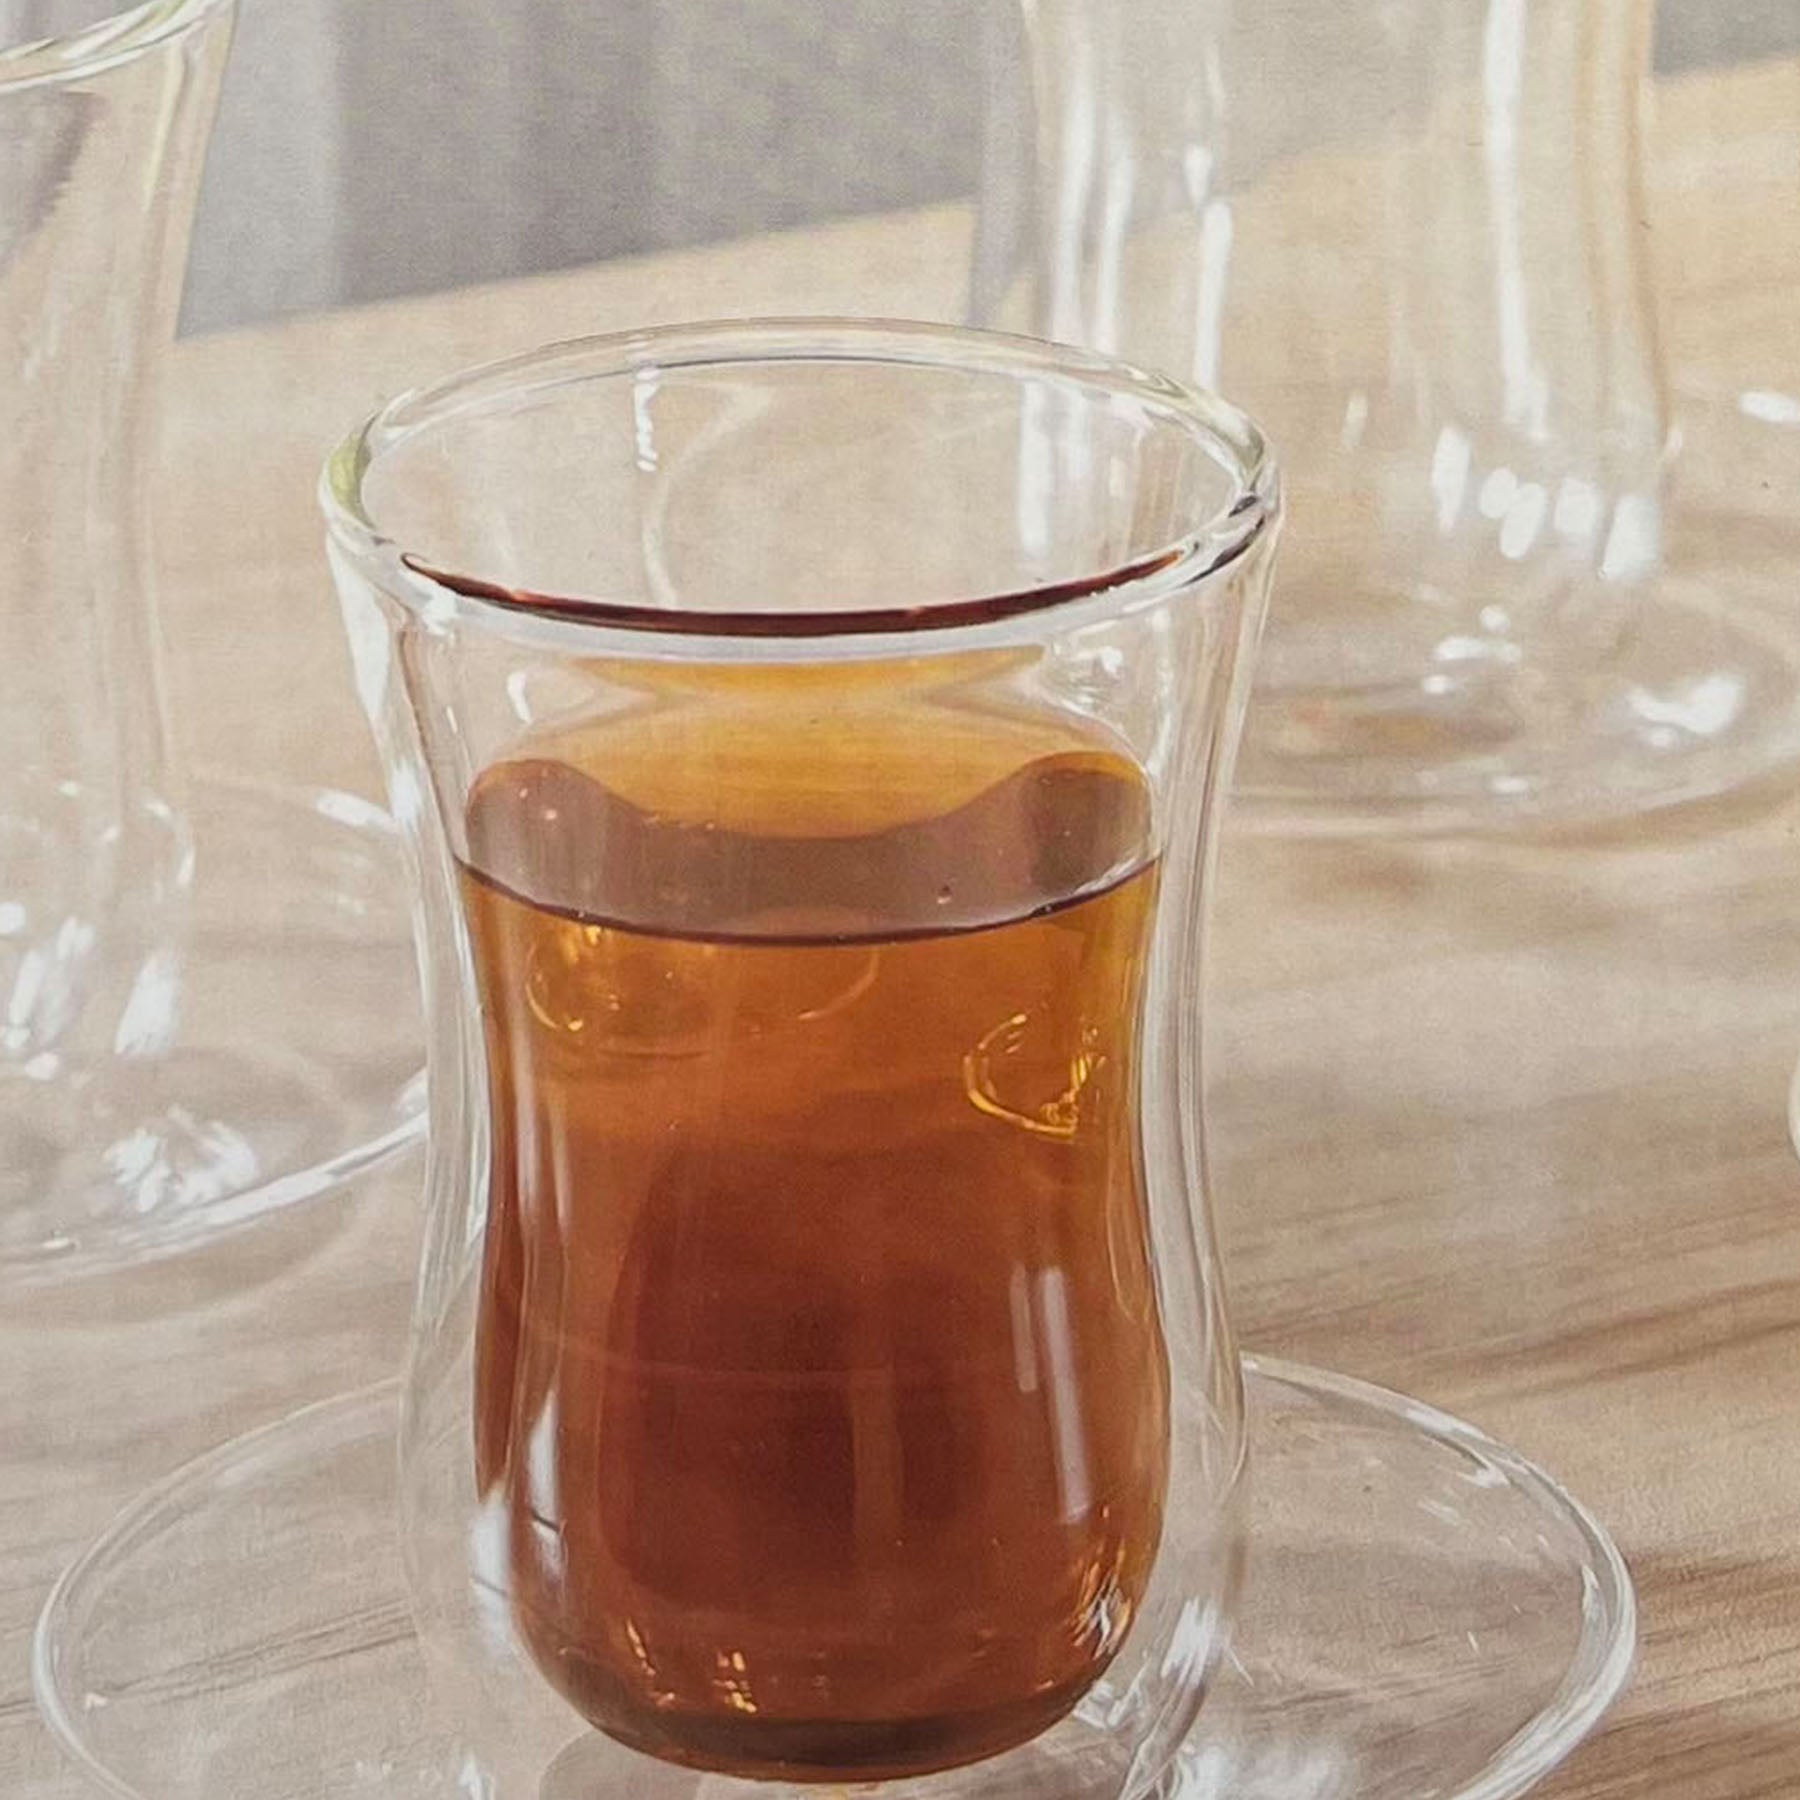 Double Wall Glass cup set